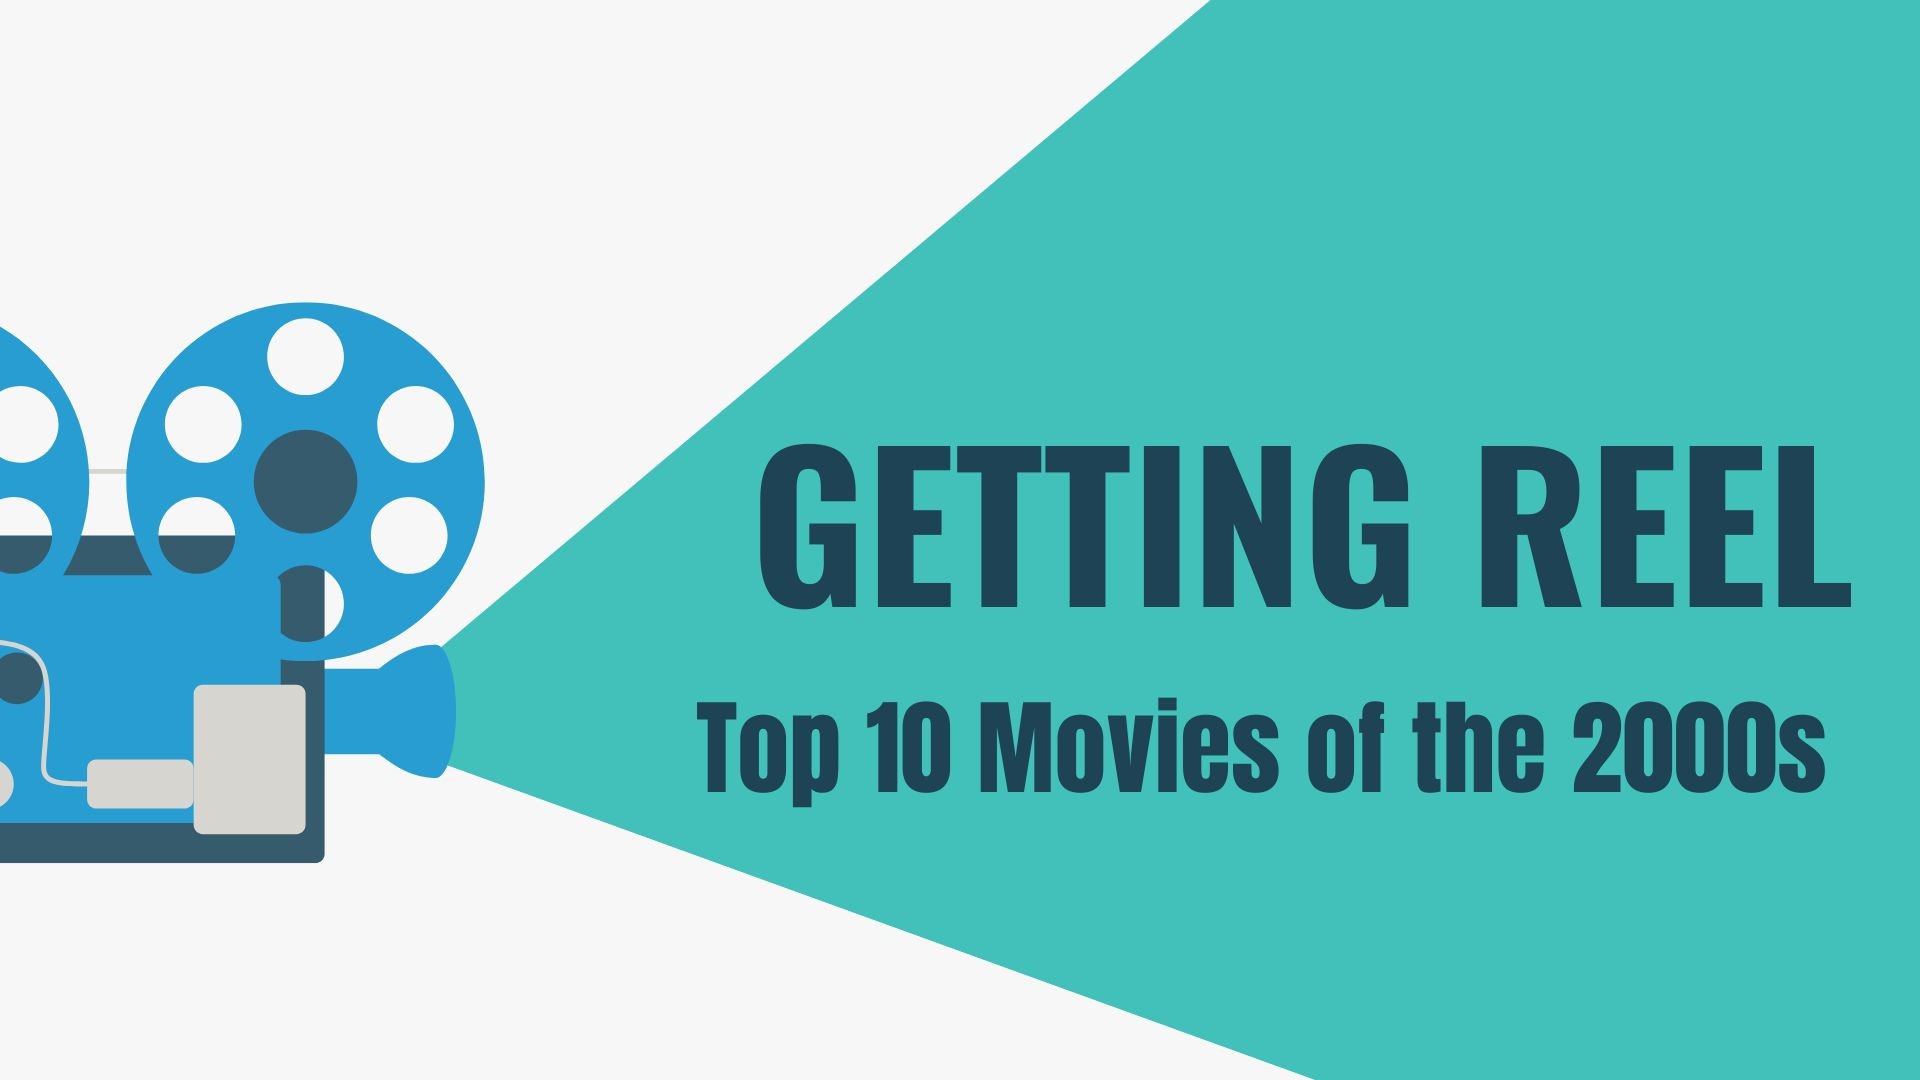 KFMB's movie reviewers rank their top 10 movies of the 2000s. They also share their past reviews of the films, which includes Minority Report, Kill Bill and more.